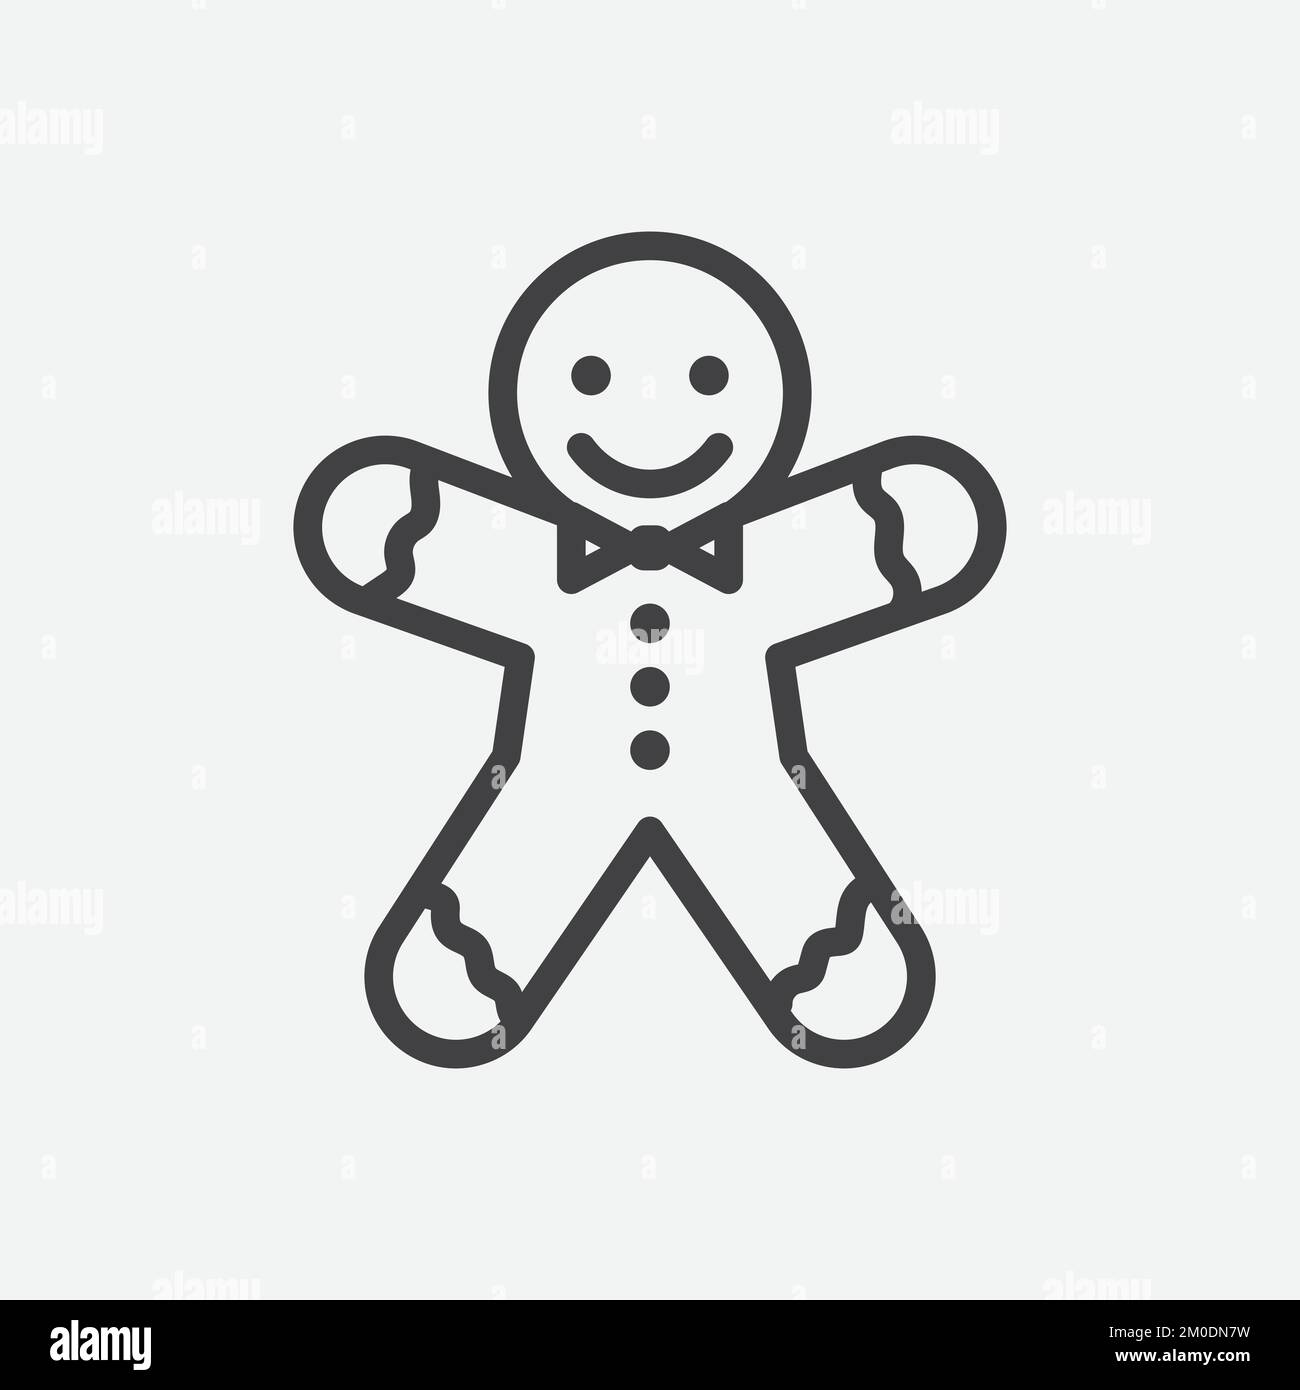 Gingerbread man cookie icon. Happy new year decoration. Merry christmas design element. New year and xmas celebration. Vector illustration Stock Vector